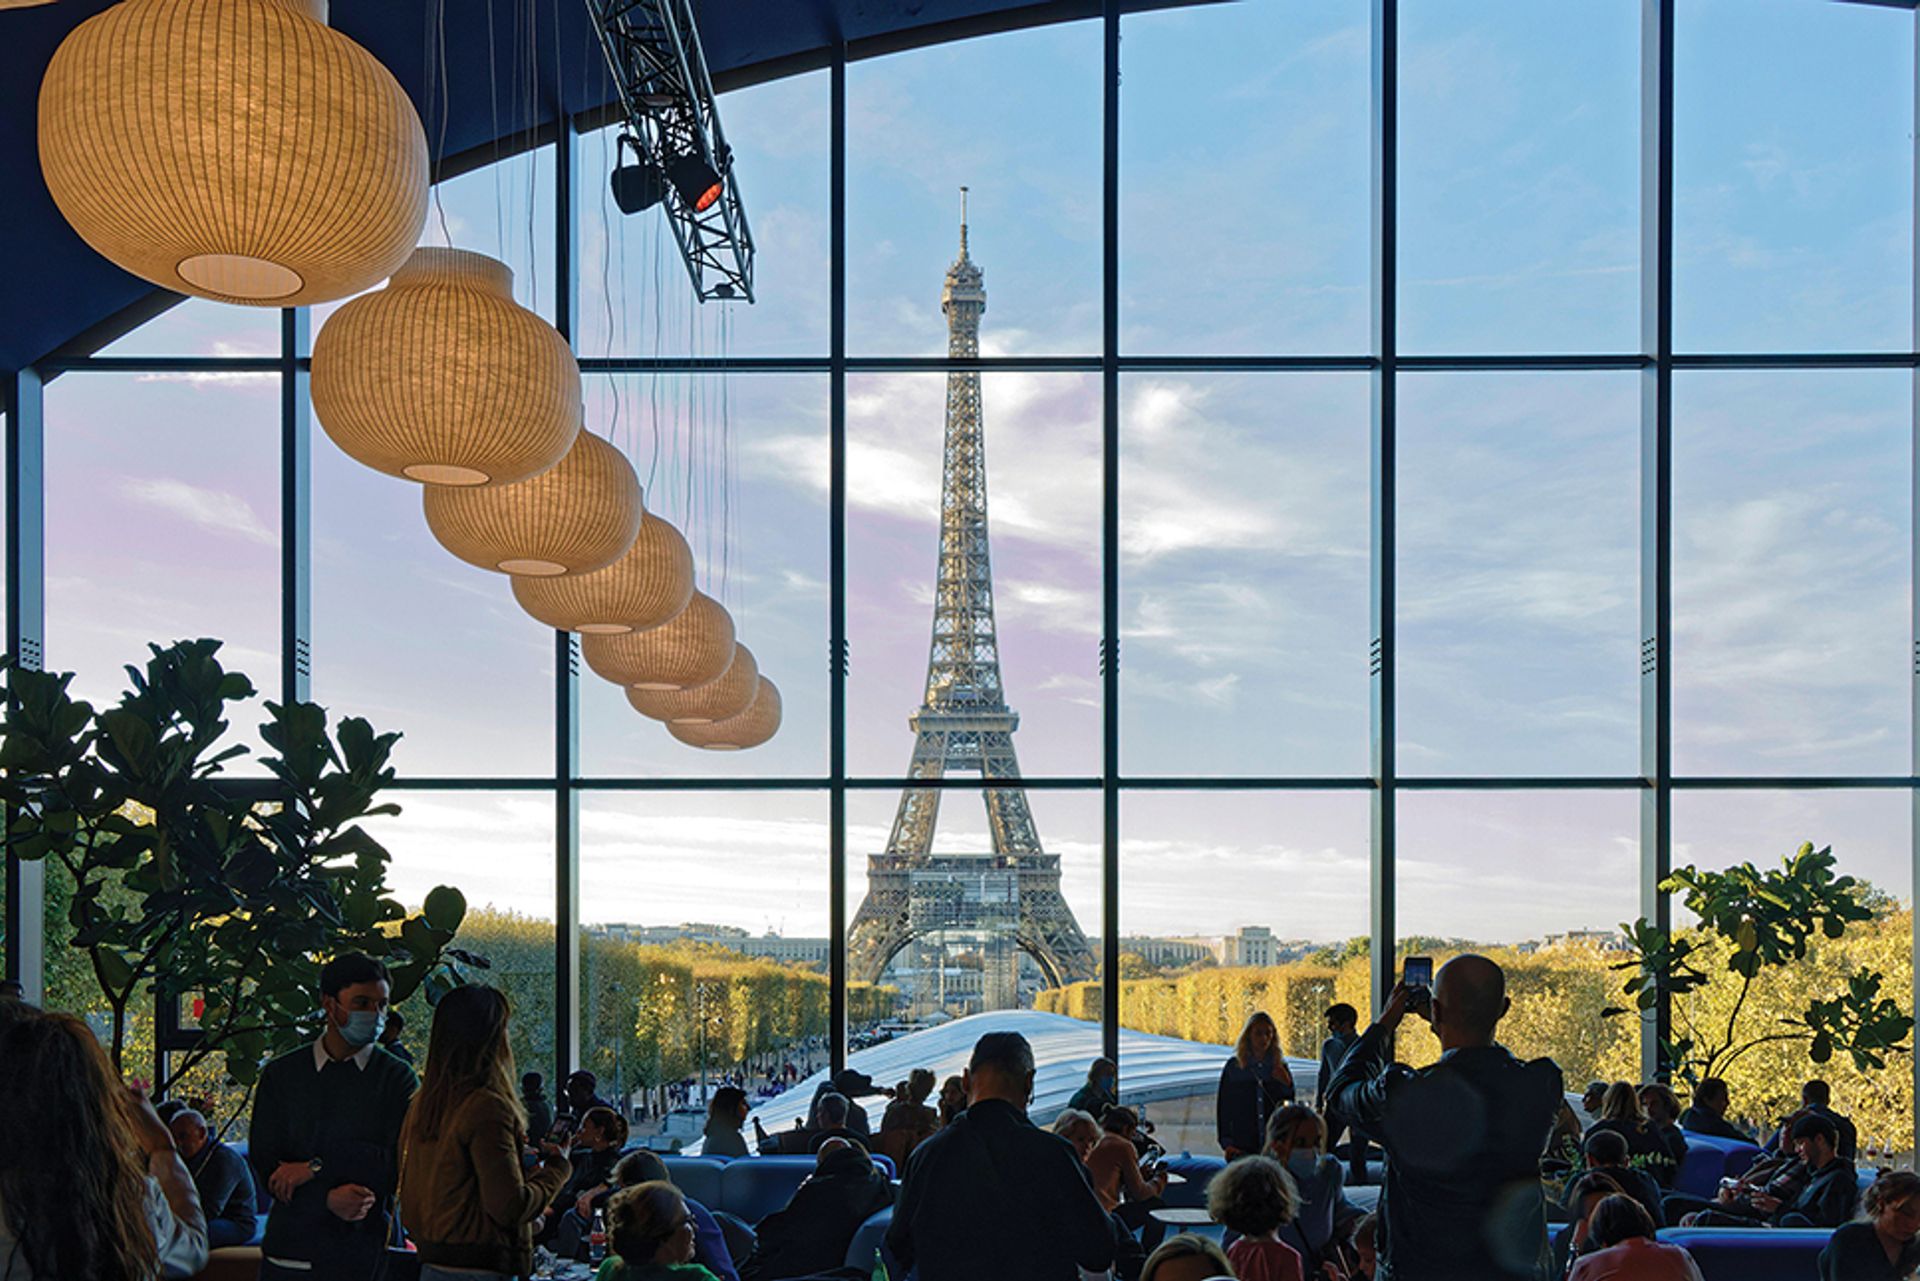 Final showing: last year’s Fiac at the Grand Palais Éphémère temporary venue turns out to have been the end of the Parisian cultural landscape fixture’s long reign in staging France’s premier art fair, after Art Basel won a seven-year contract at the venue © Gerard Crossay/Alamy